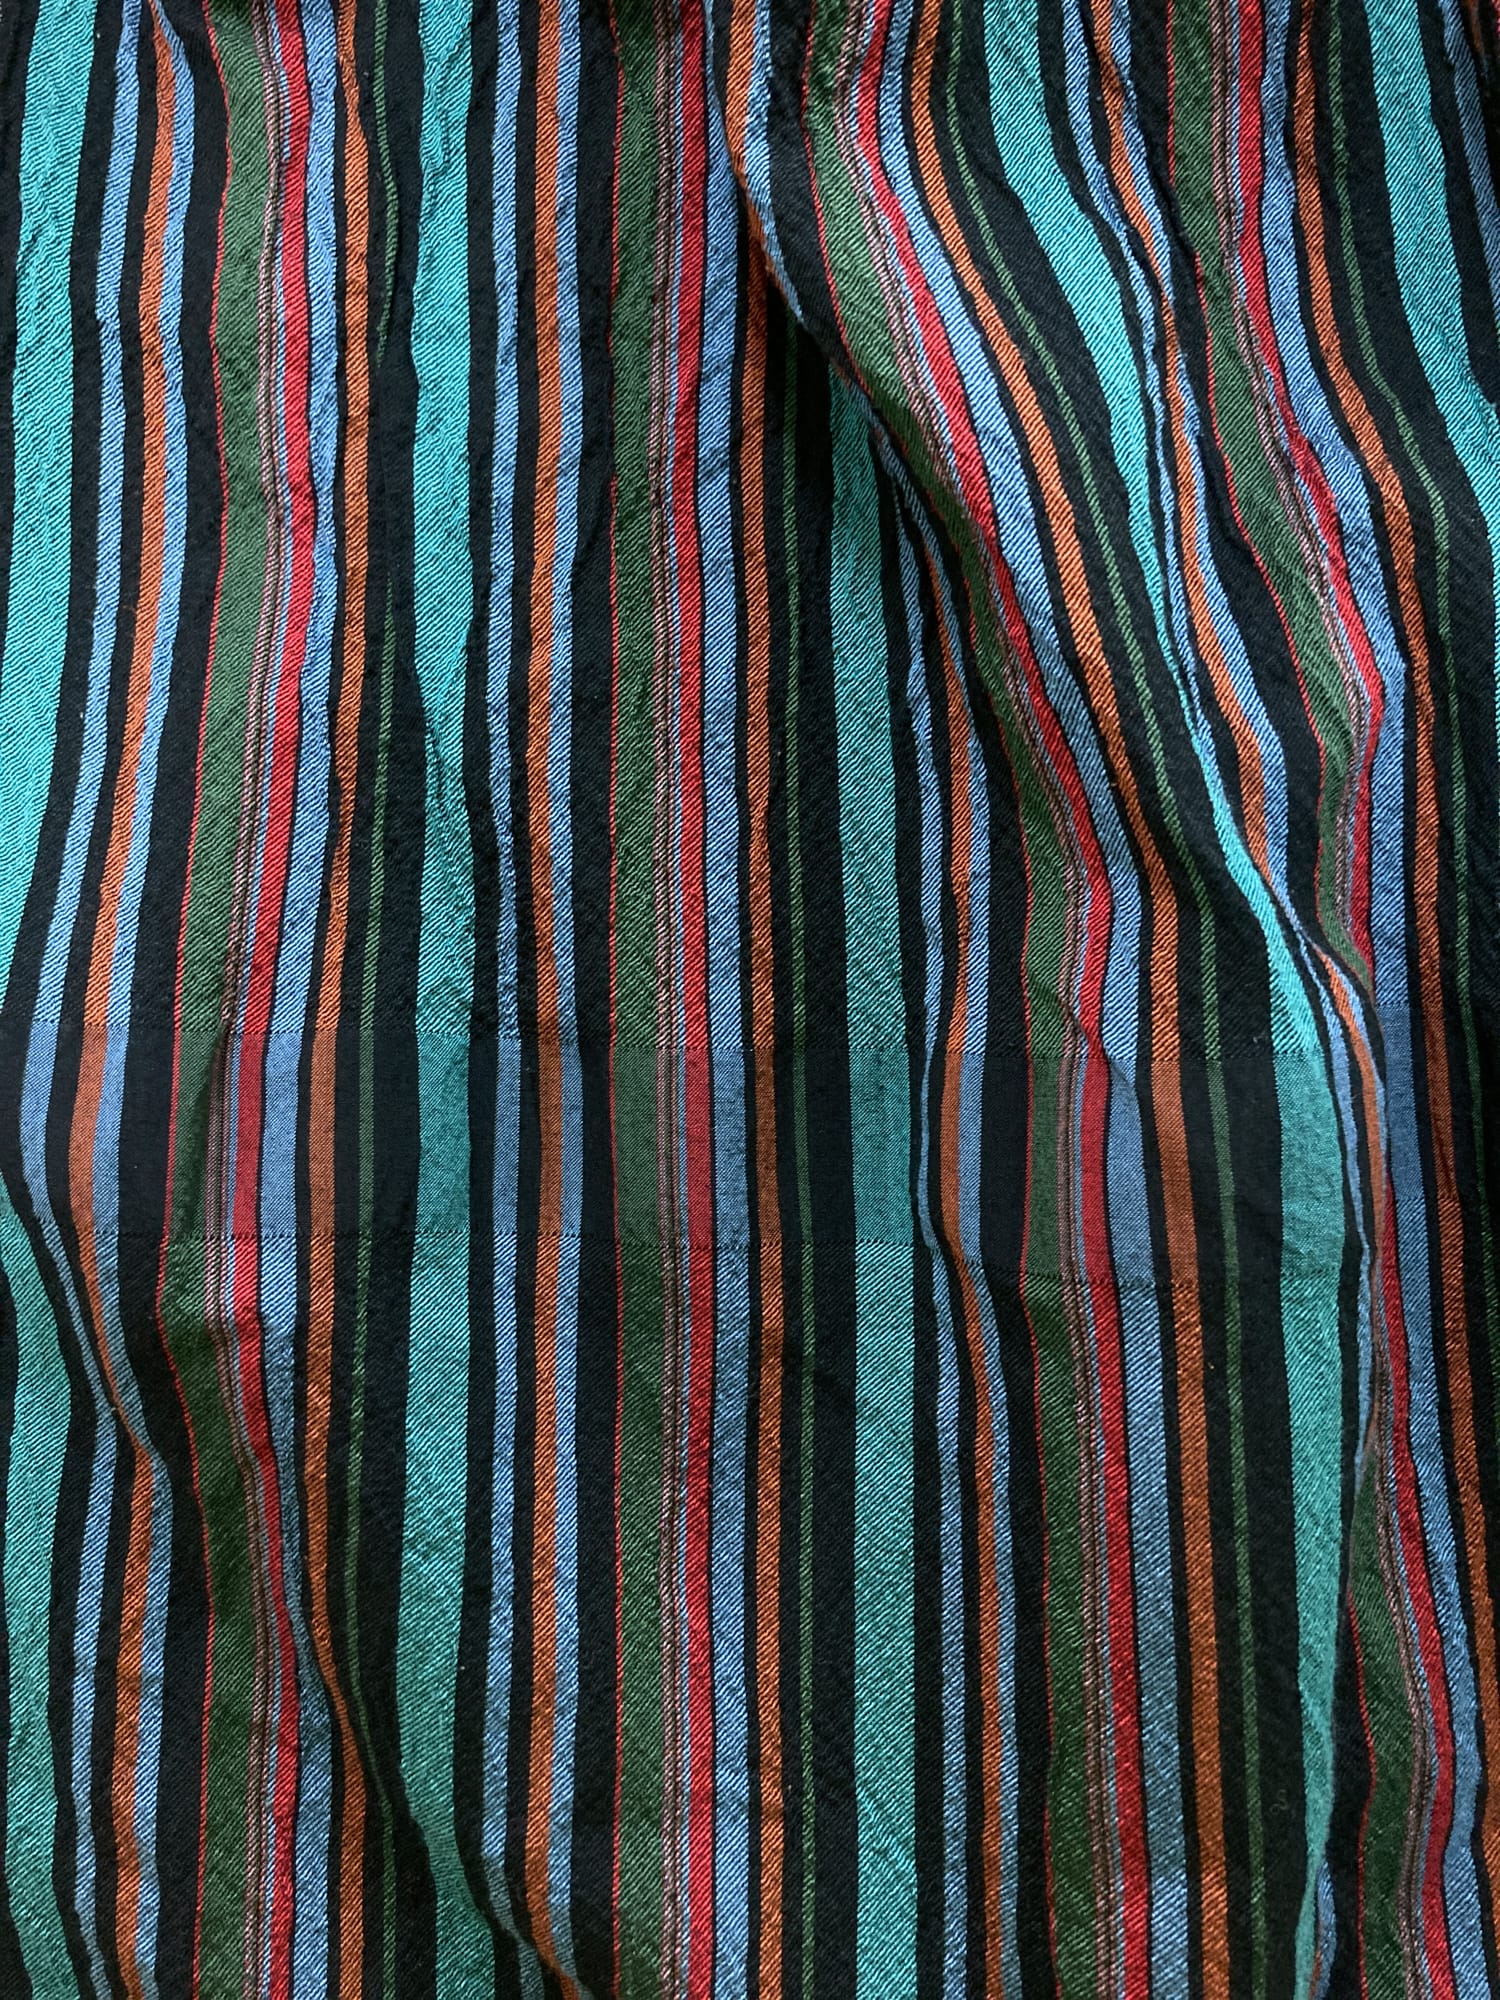 Issey Miyake A-POC multicolour striped cotton maxi skirt - size 2 M S